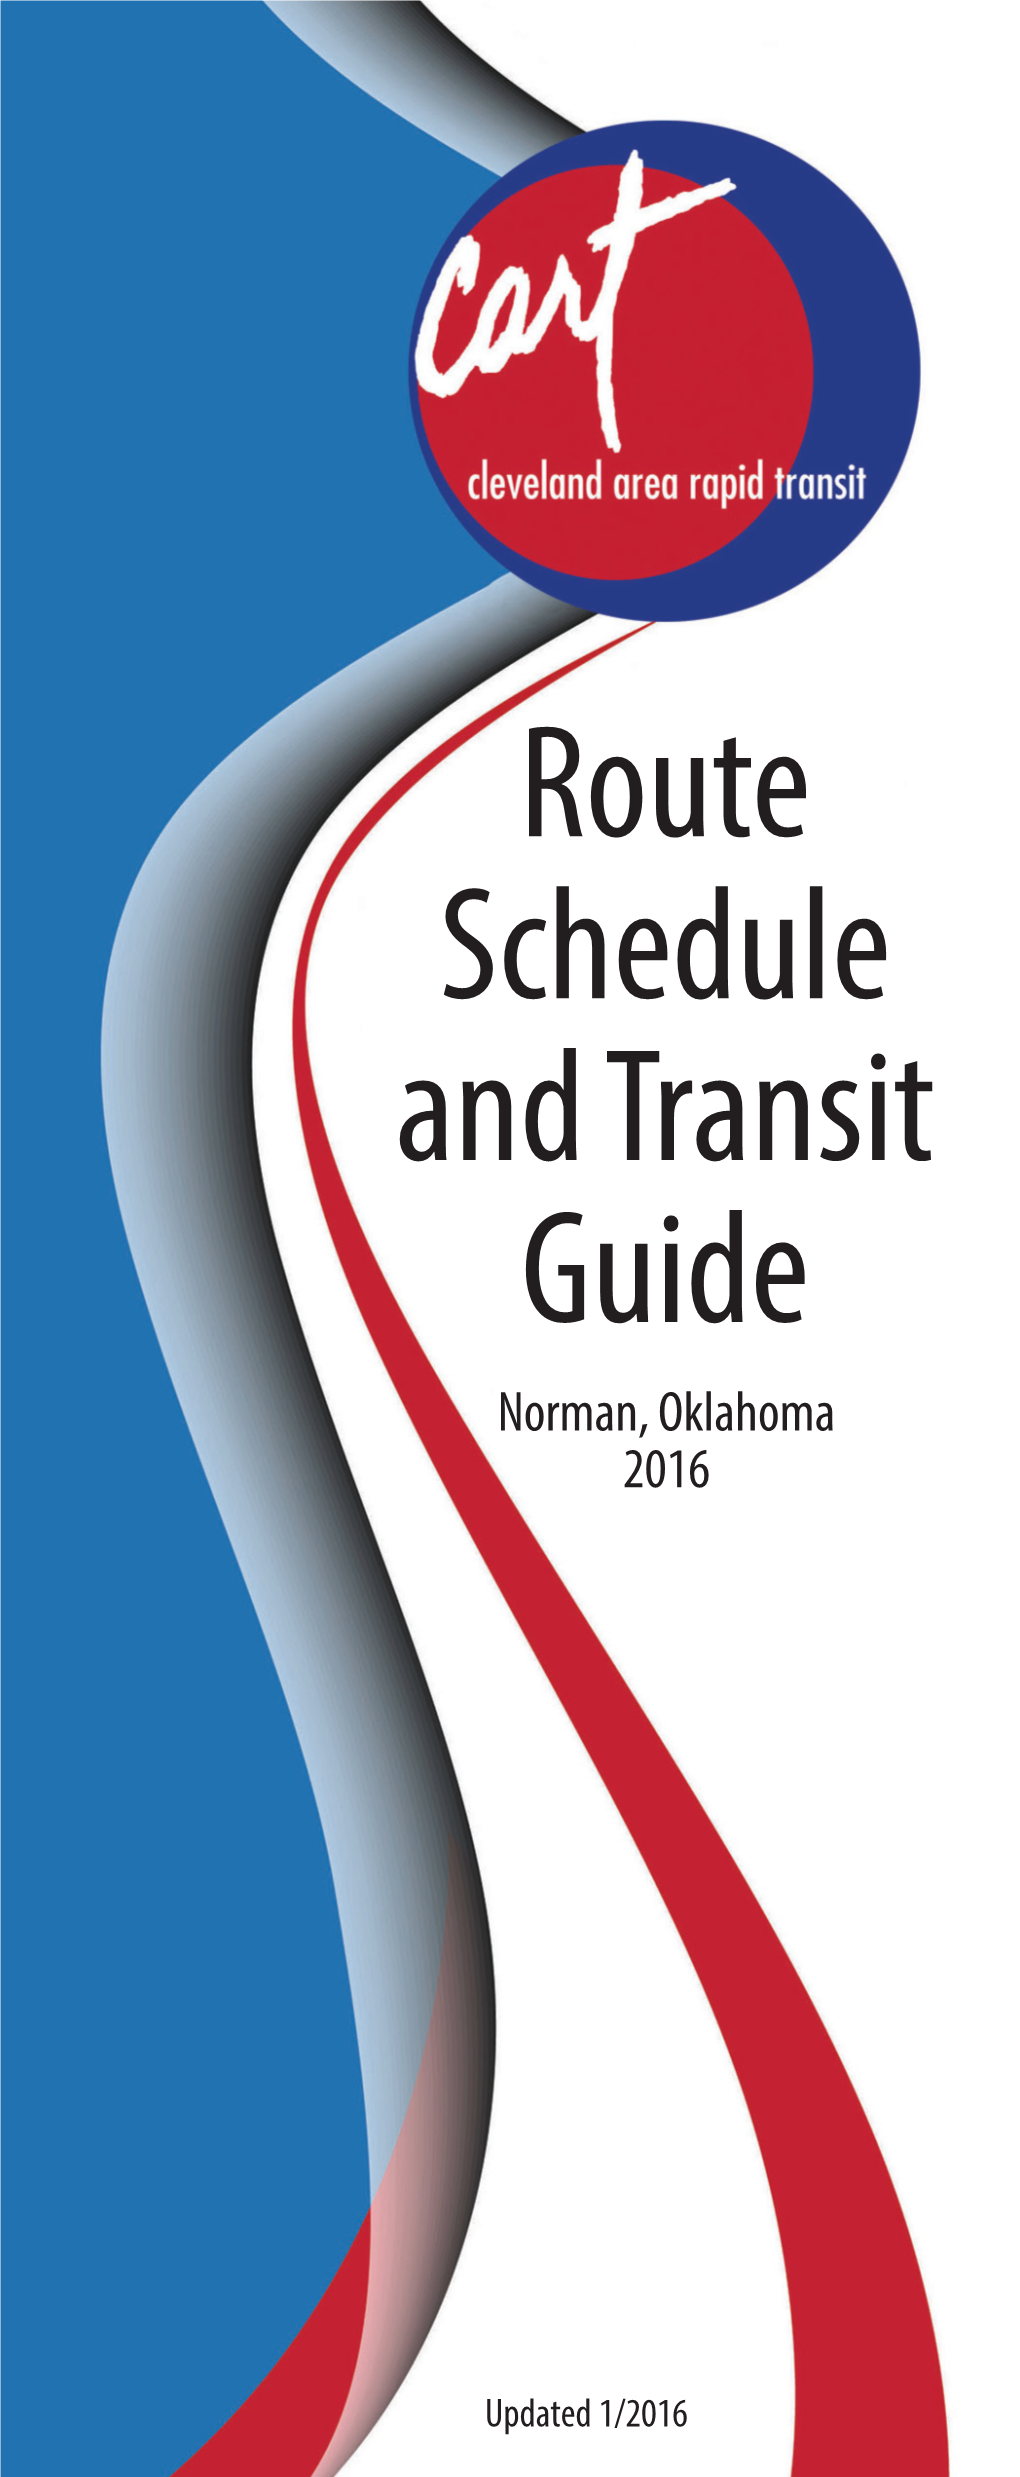 Route Schedule and Transit Guide Norman, Oklahoma 2016